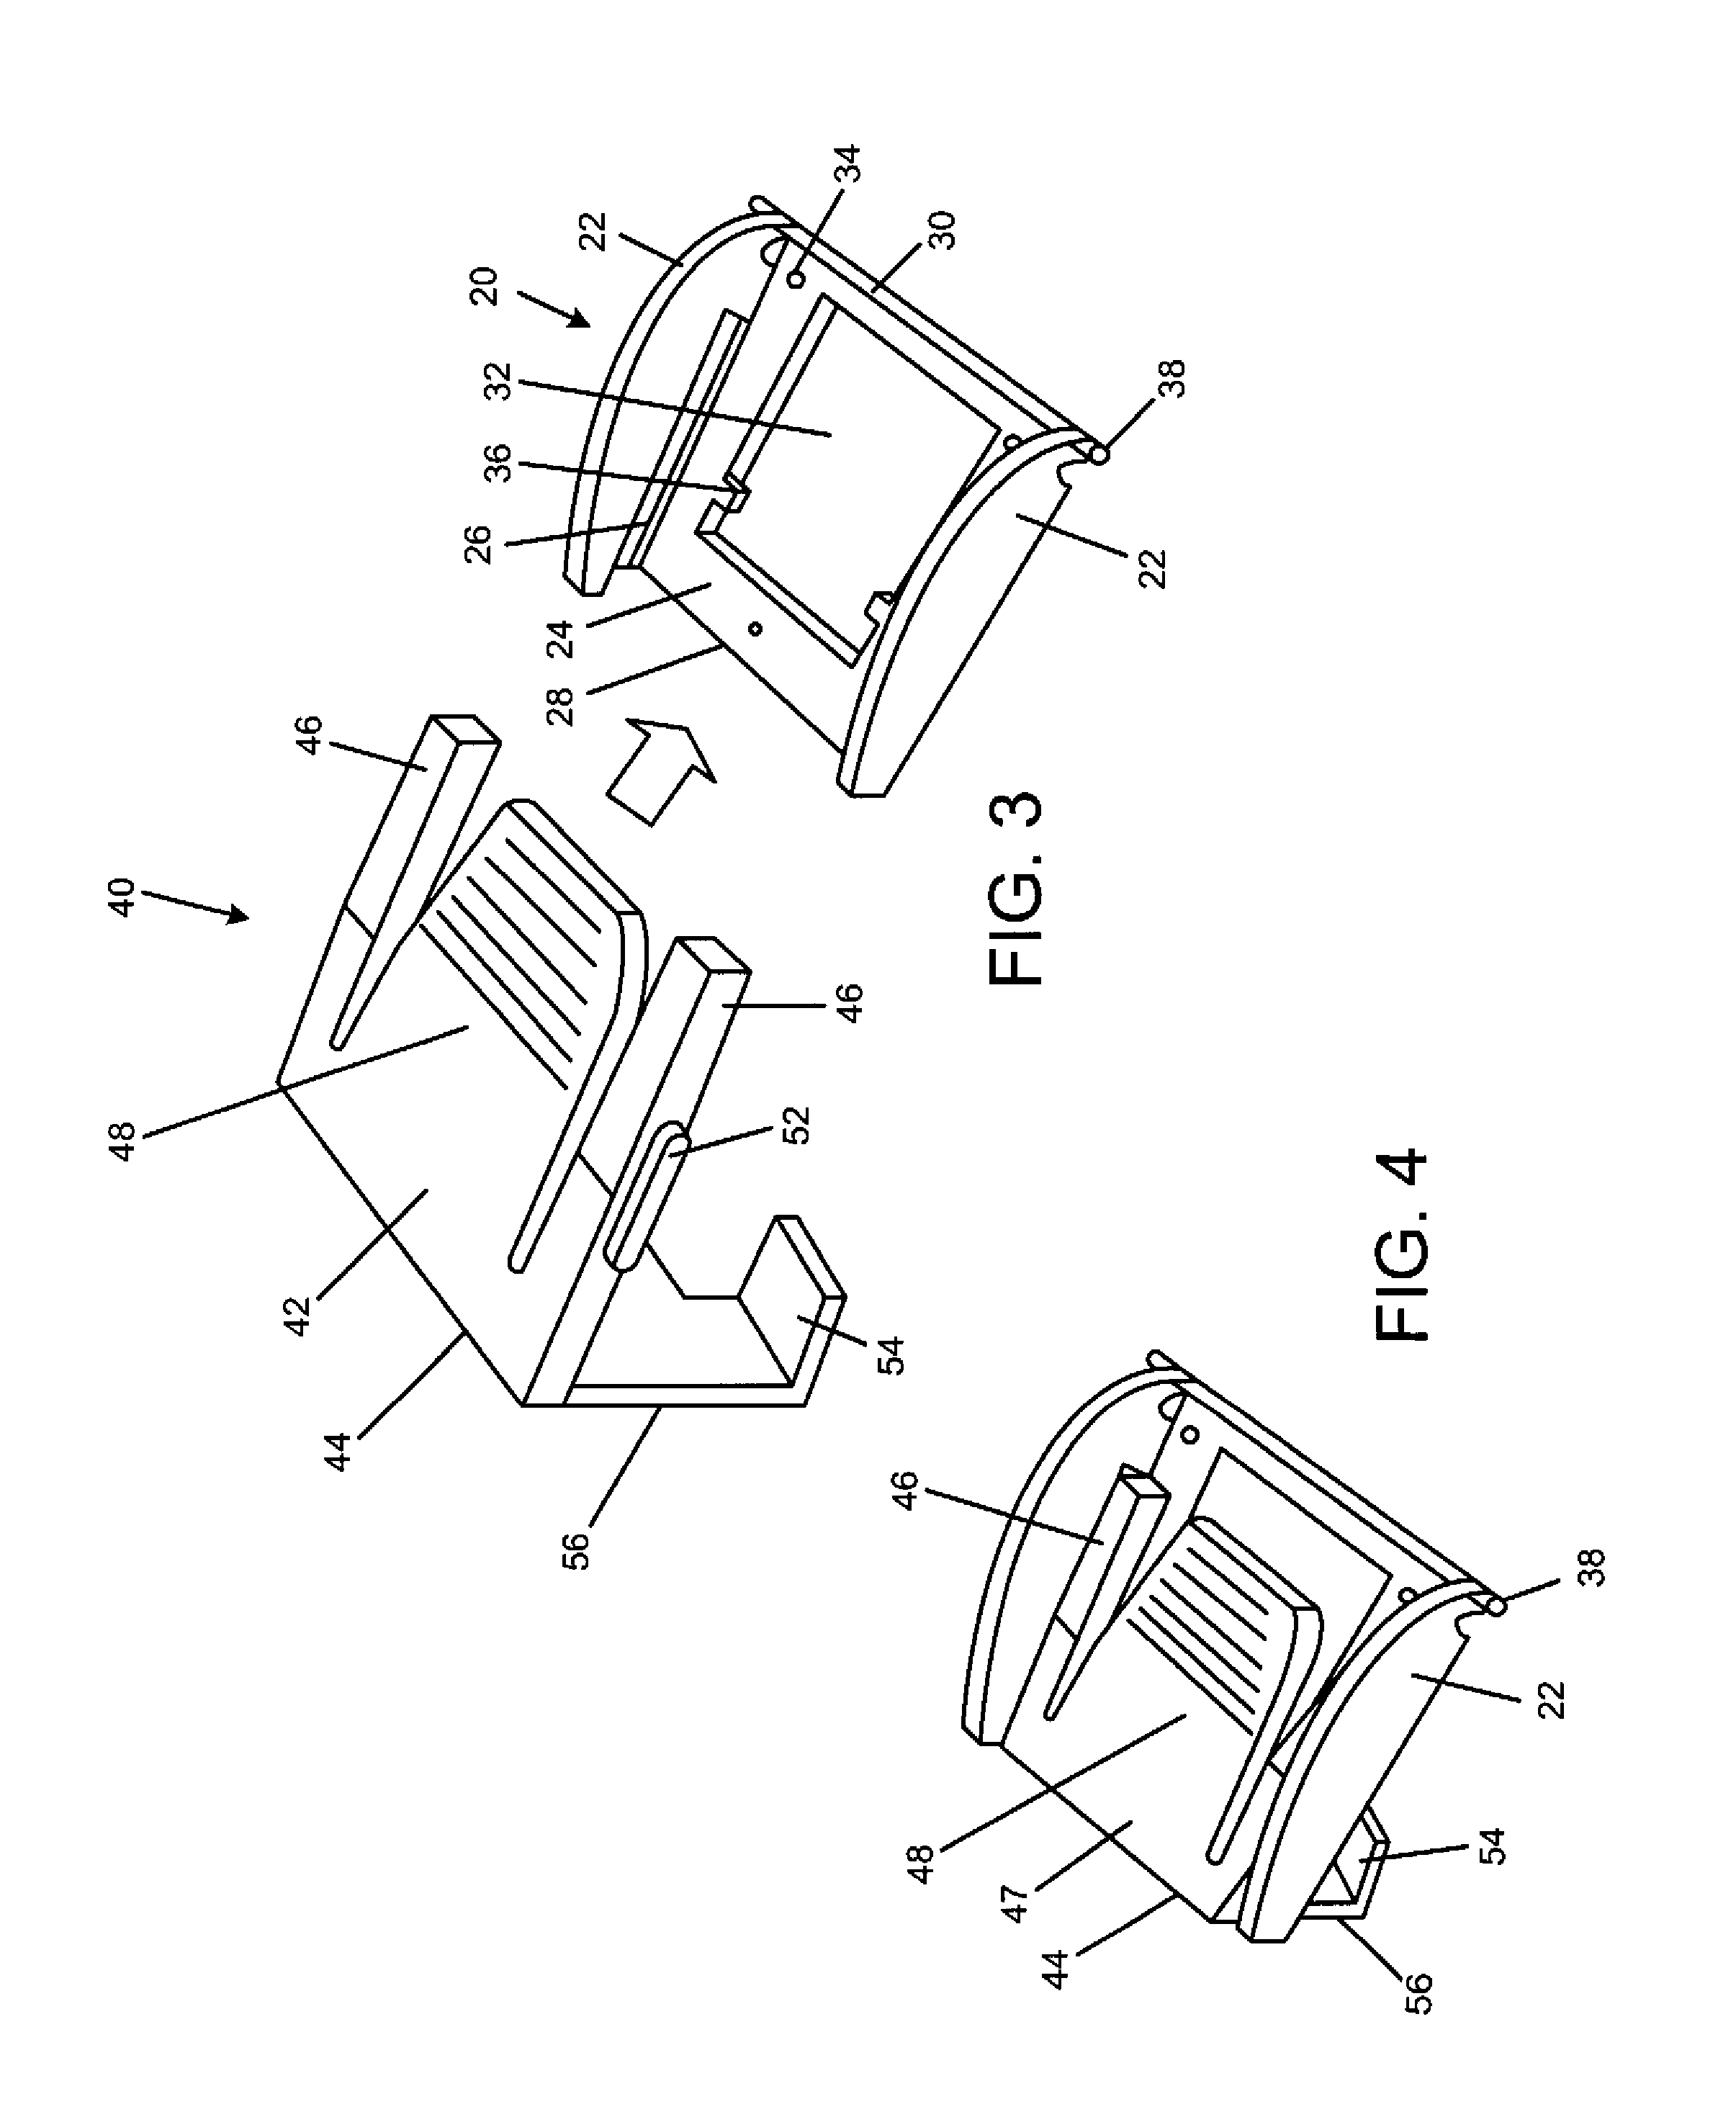 Latch for a medical instrument sterilization container